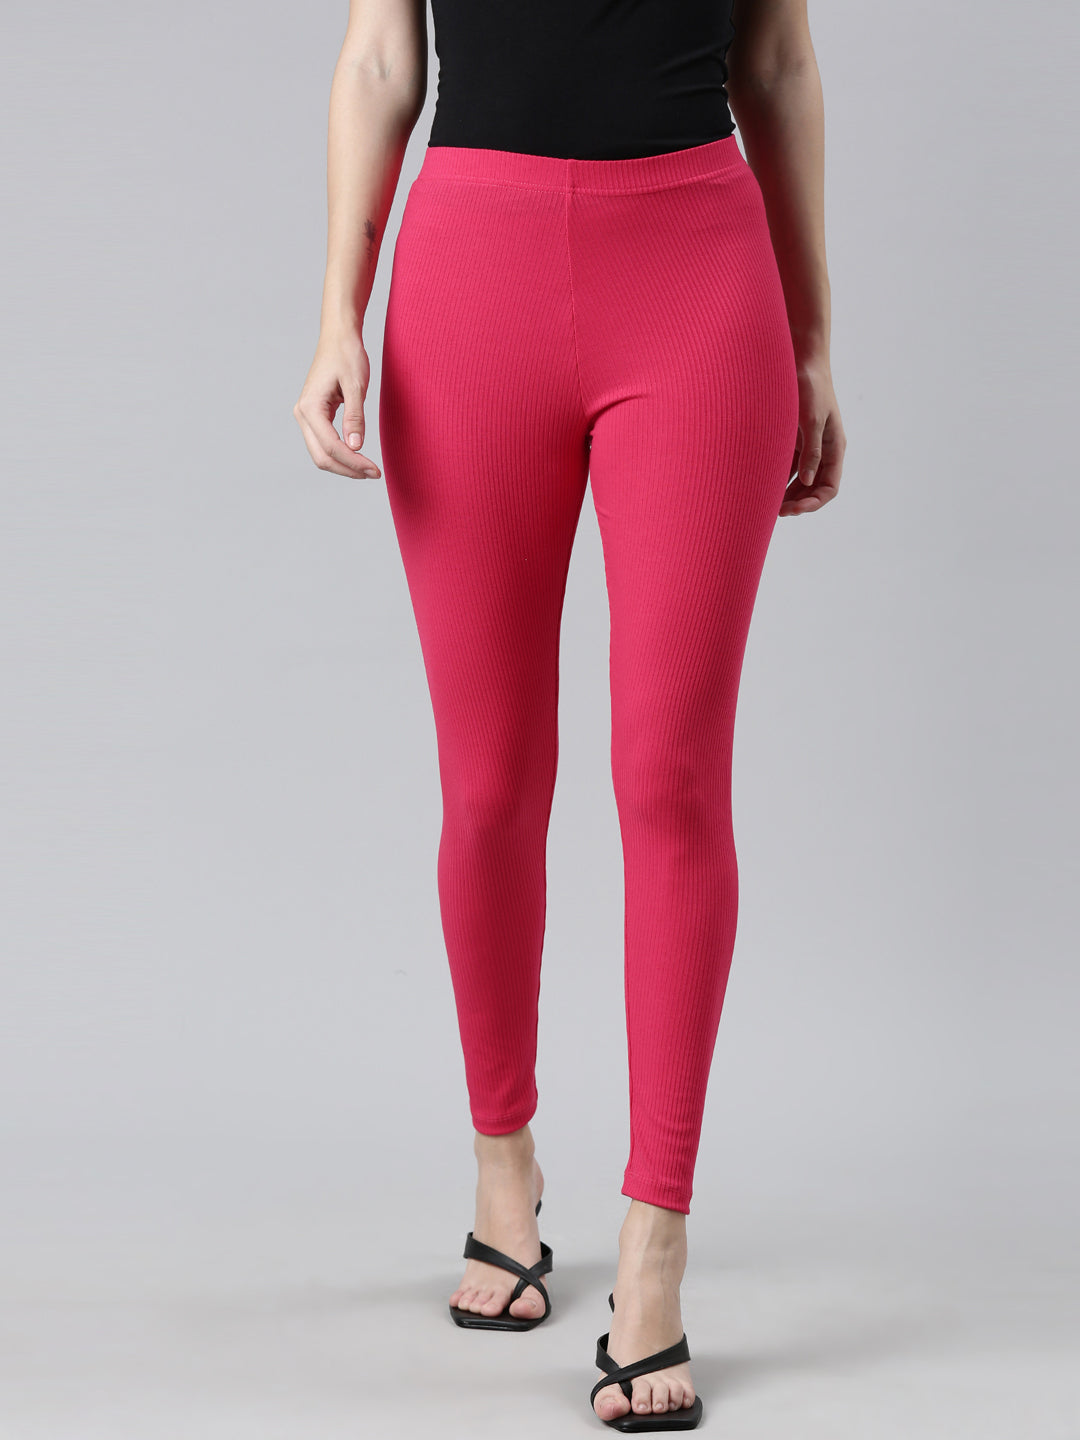 Berrylush Women Solid Pink Super Stretchy & High Waisted Sports Tights